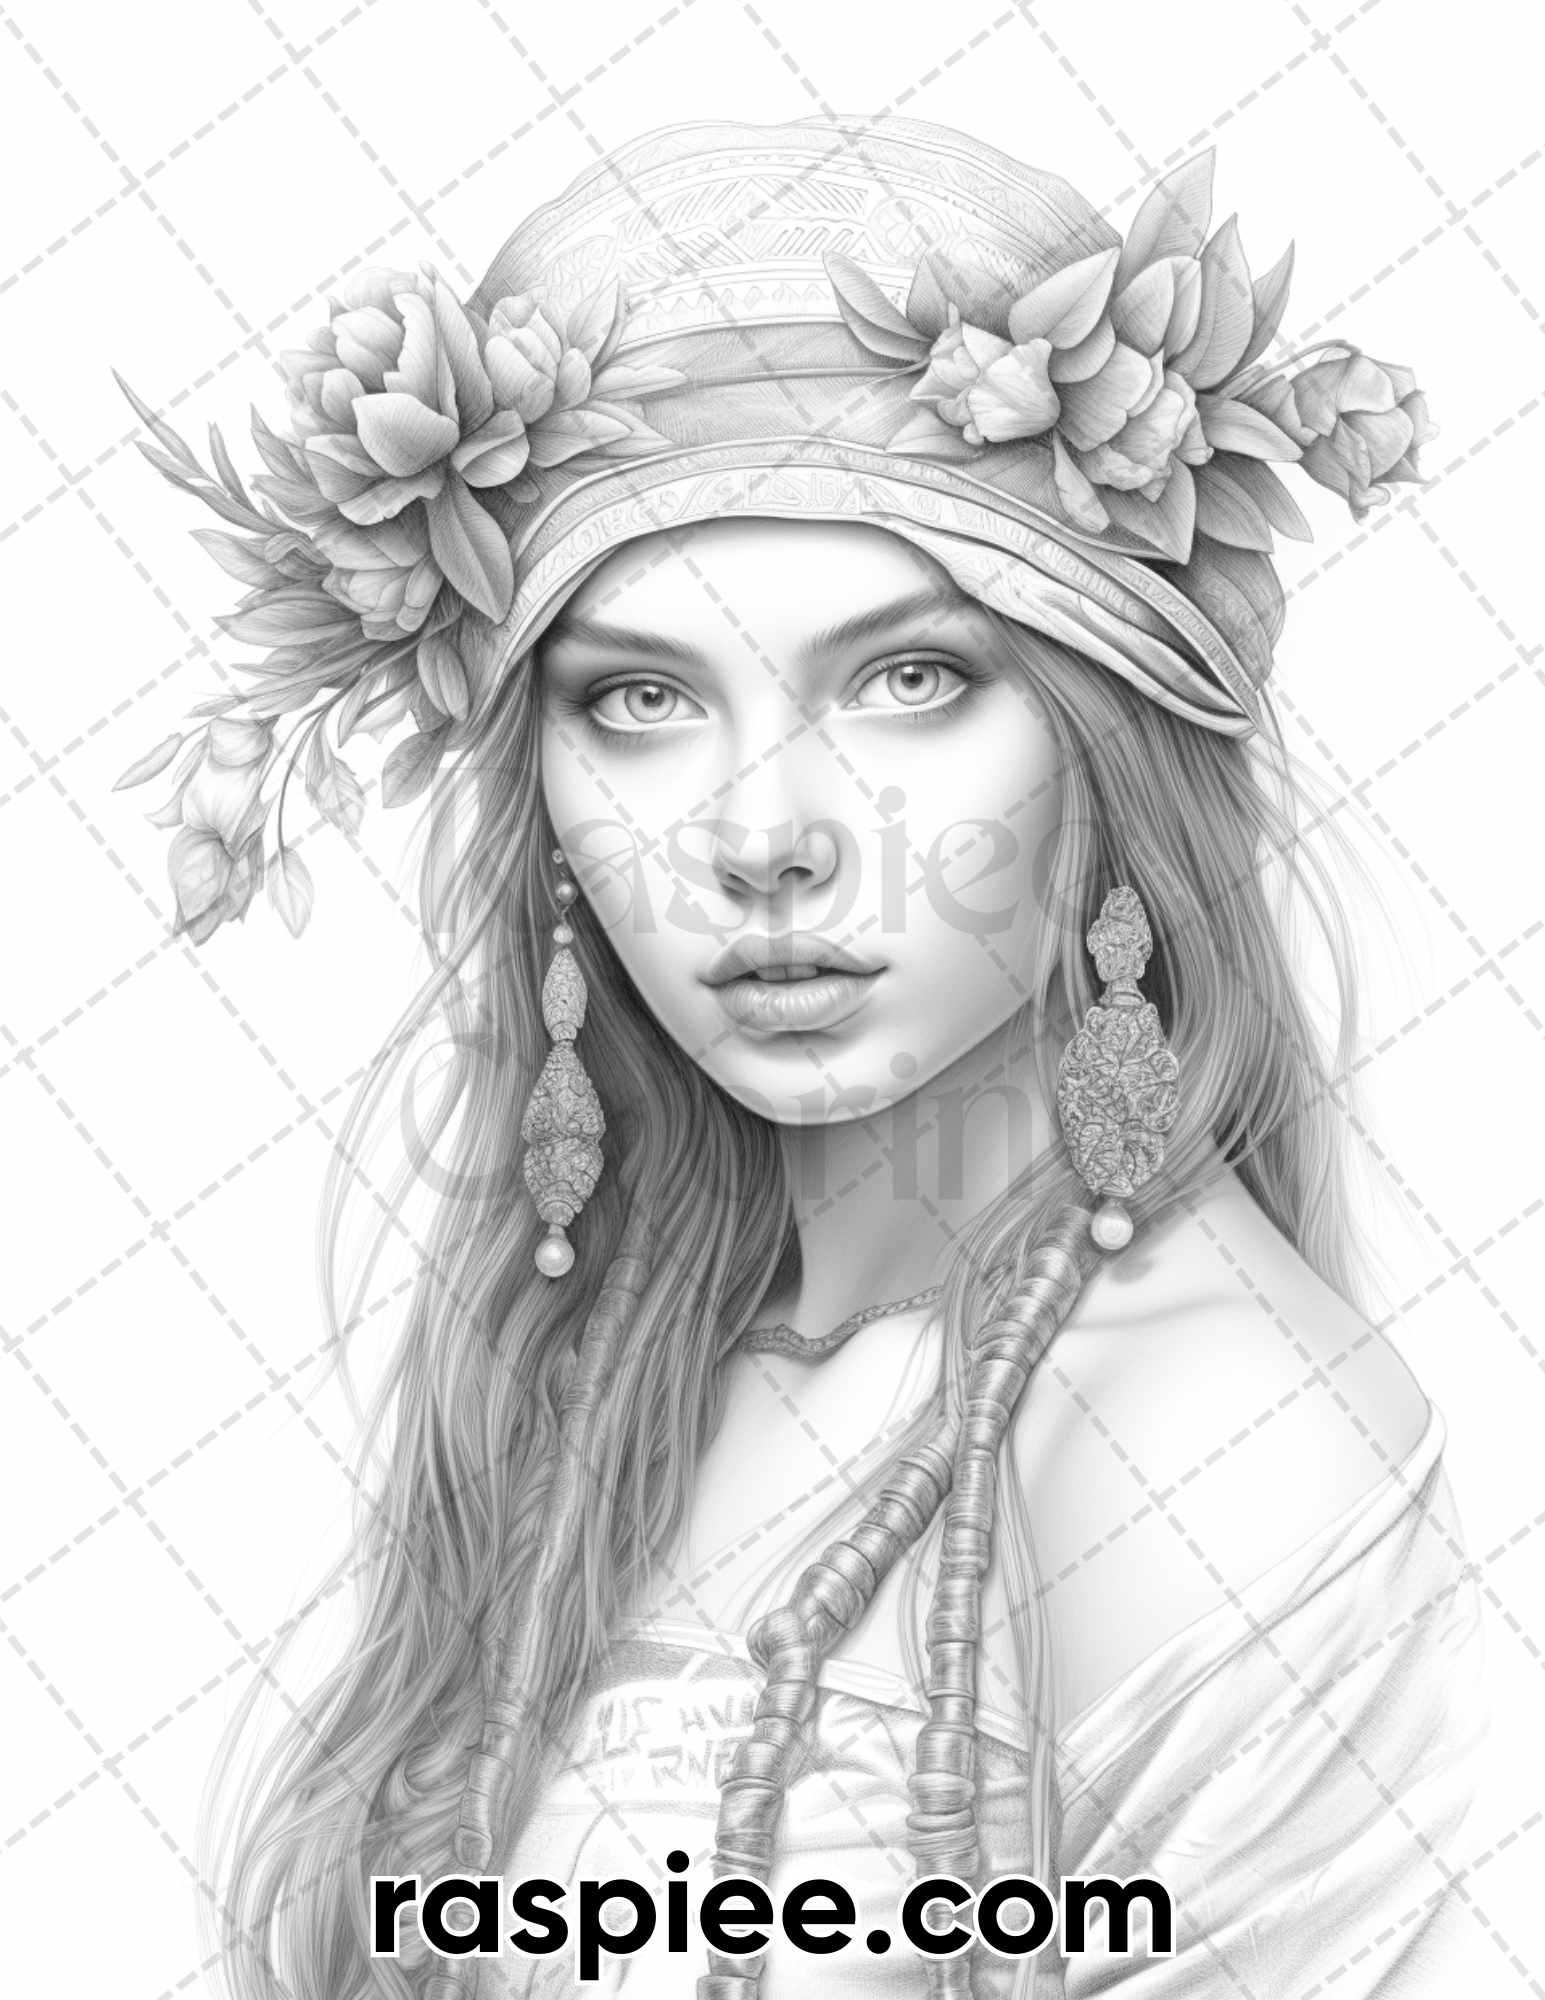 Bohemian Grayscale Coloring Page, Adult Stress-Relief Coloring, Printable Boho Art Design, Intricate DIY Coloring Sheet, Detailed Printable Artwork, Relaxation Coloring Book, Hand-Drawn Illustrations, High-Quality Coloring Image, Creative Coloring Pattern, Portrait Coloring Pages, Portrait Coloring Book Printable